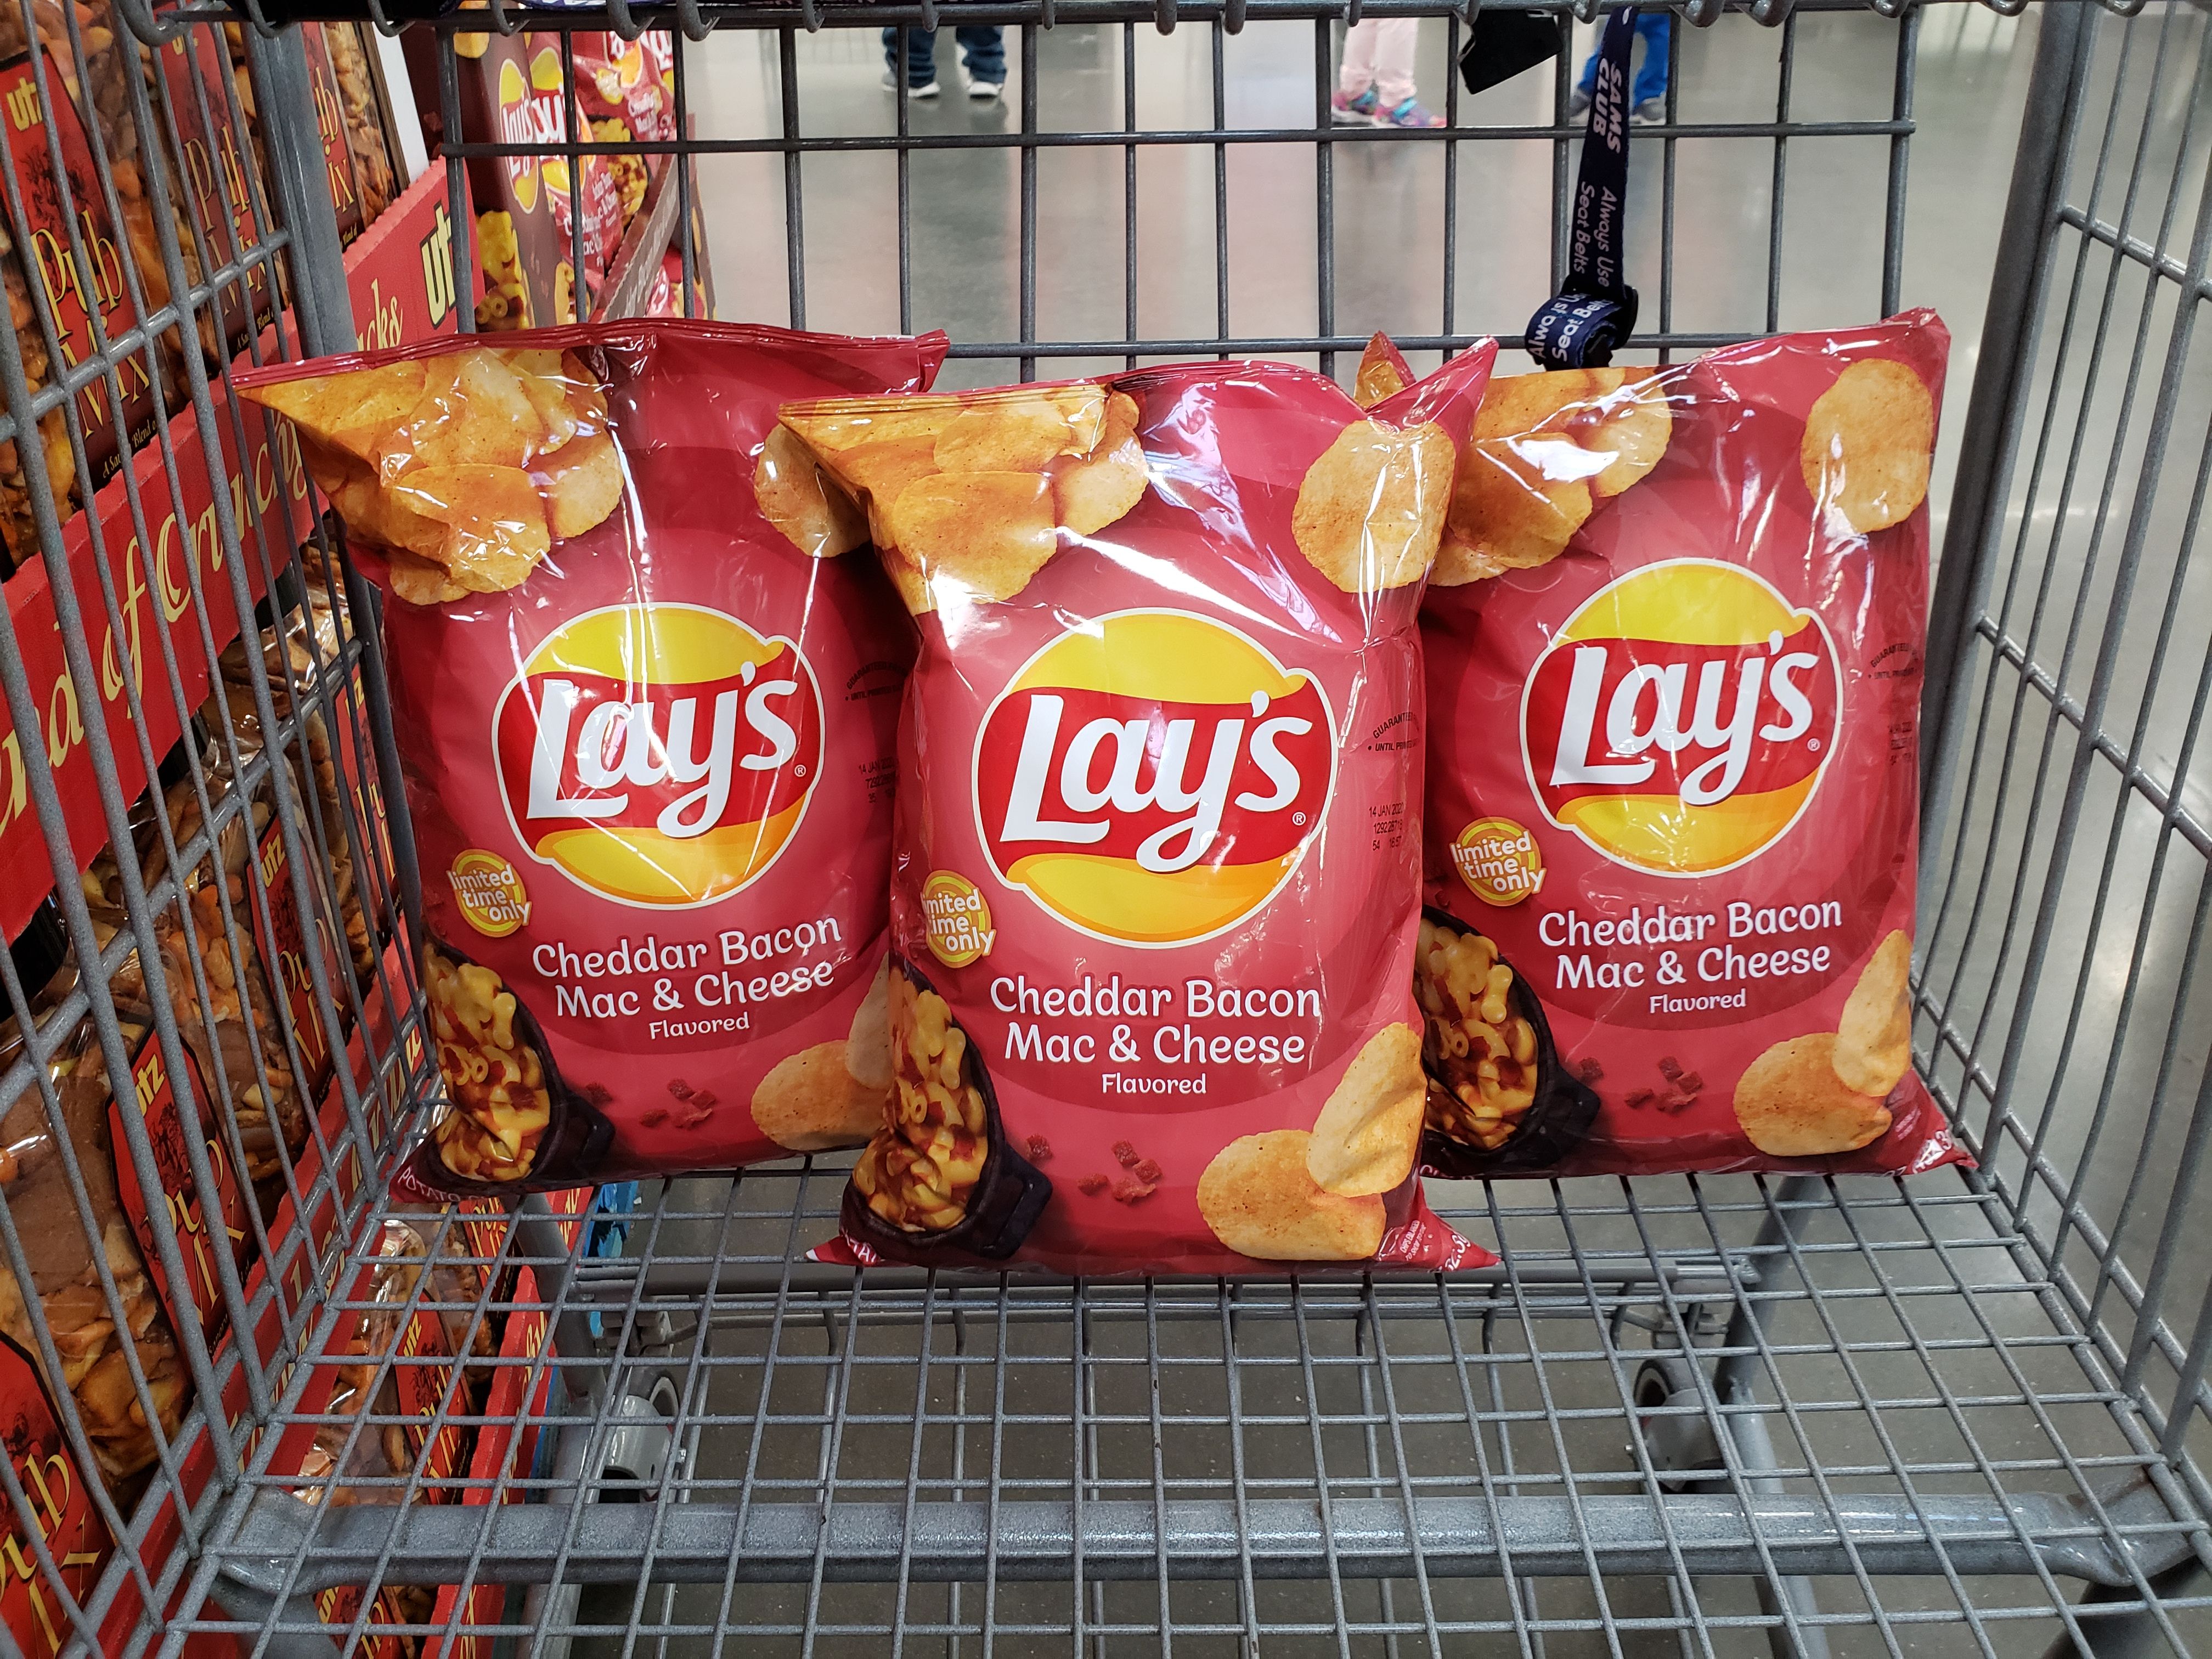 You Can Buy Lay's Cheddar Bacon Mac & Cheese Chips At Sam's Club